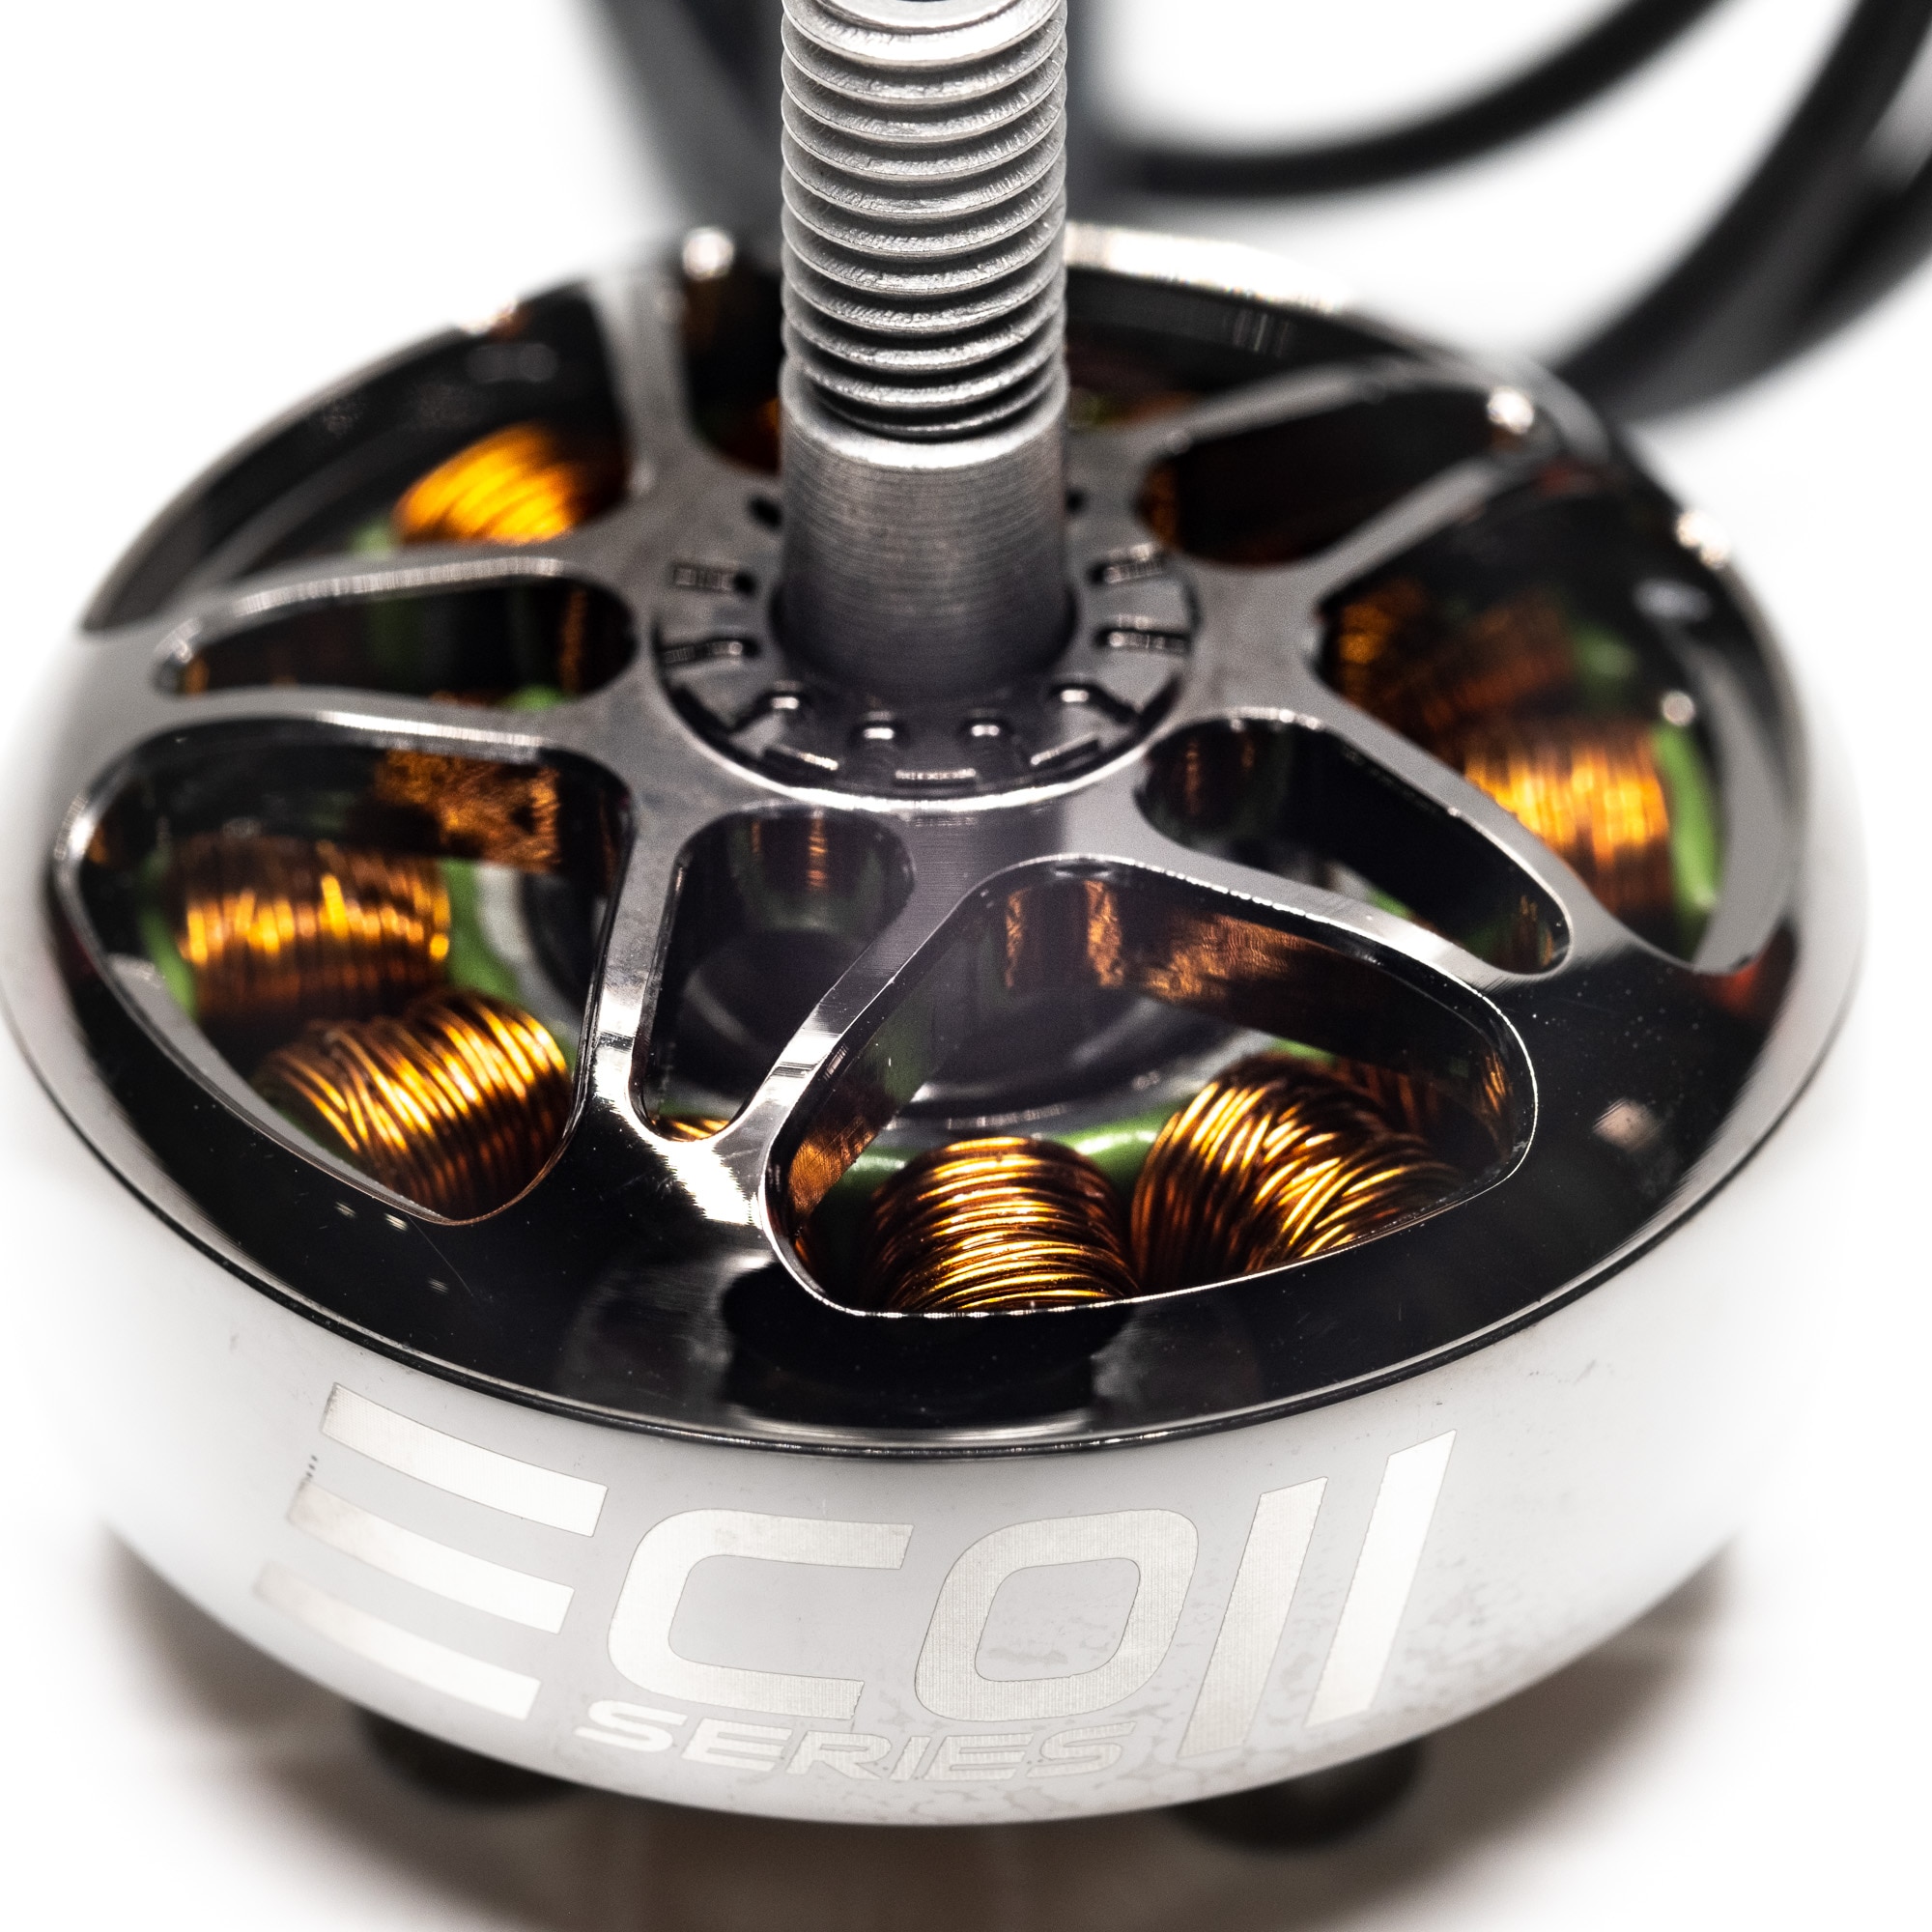 Emax ECO II Series Brushless Motor for Drones